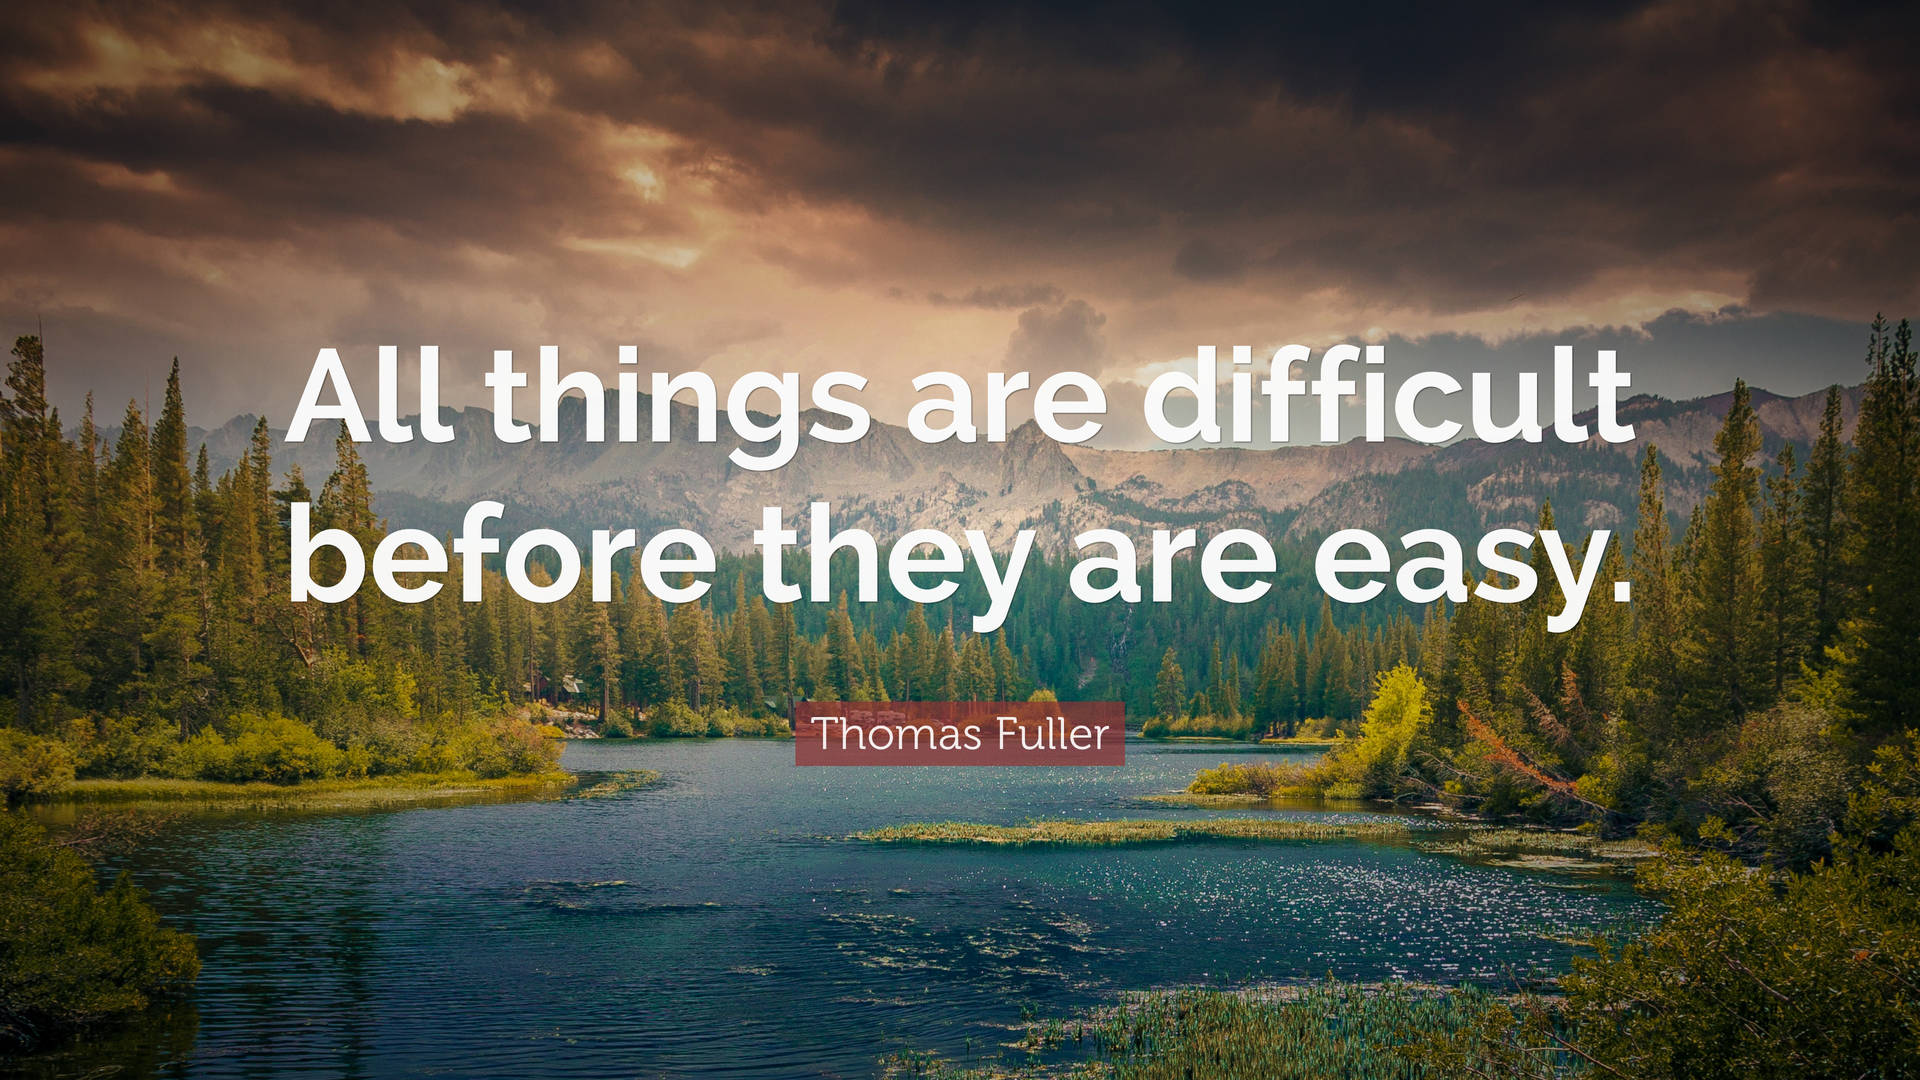 Thomas Fuller Positive Quotes Background